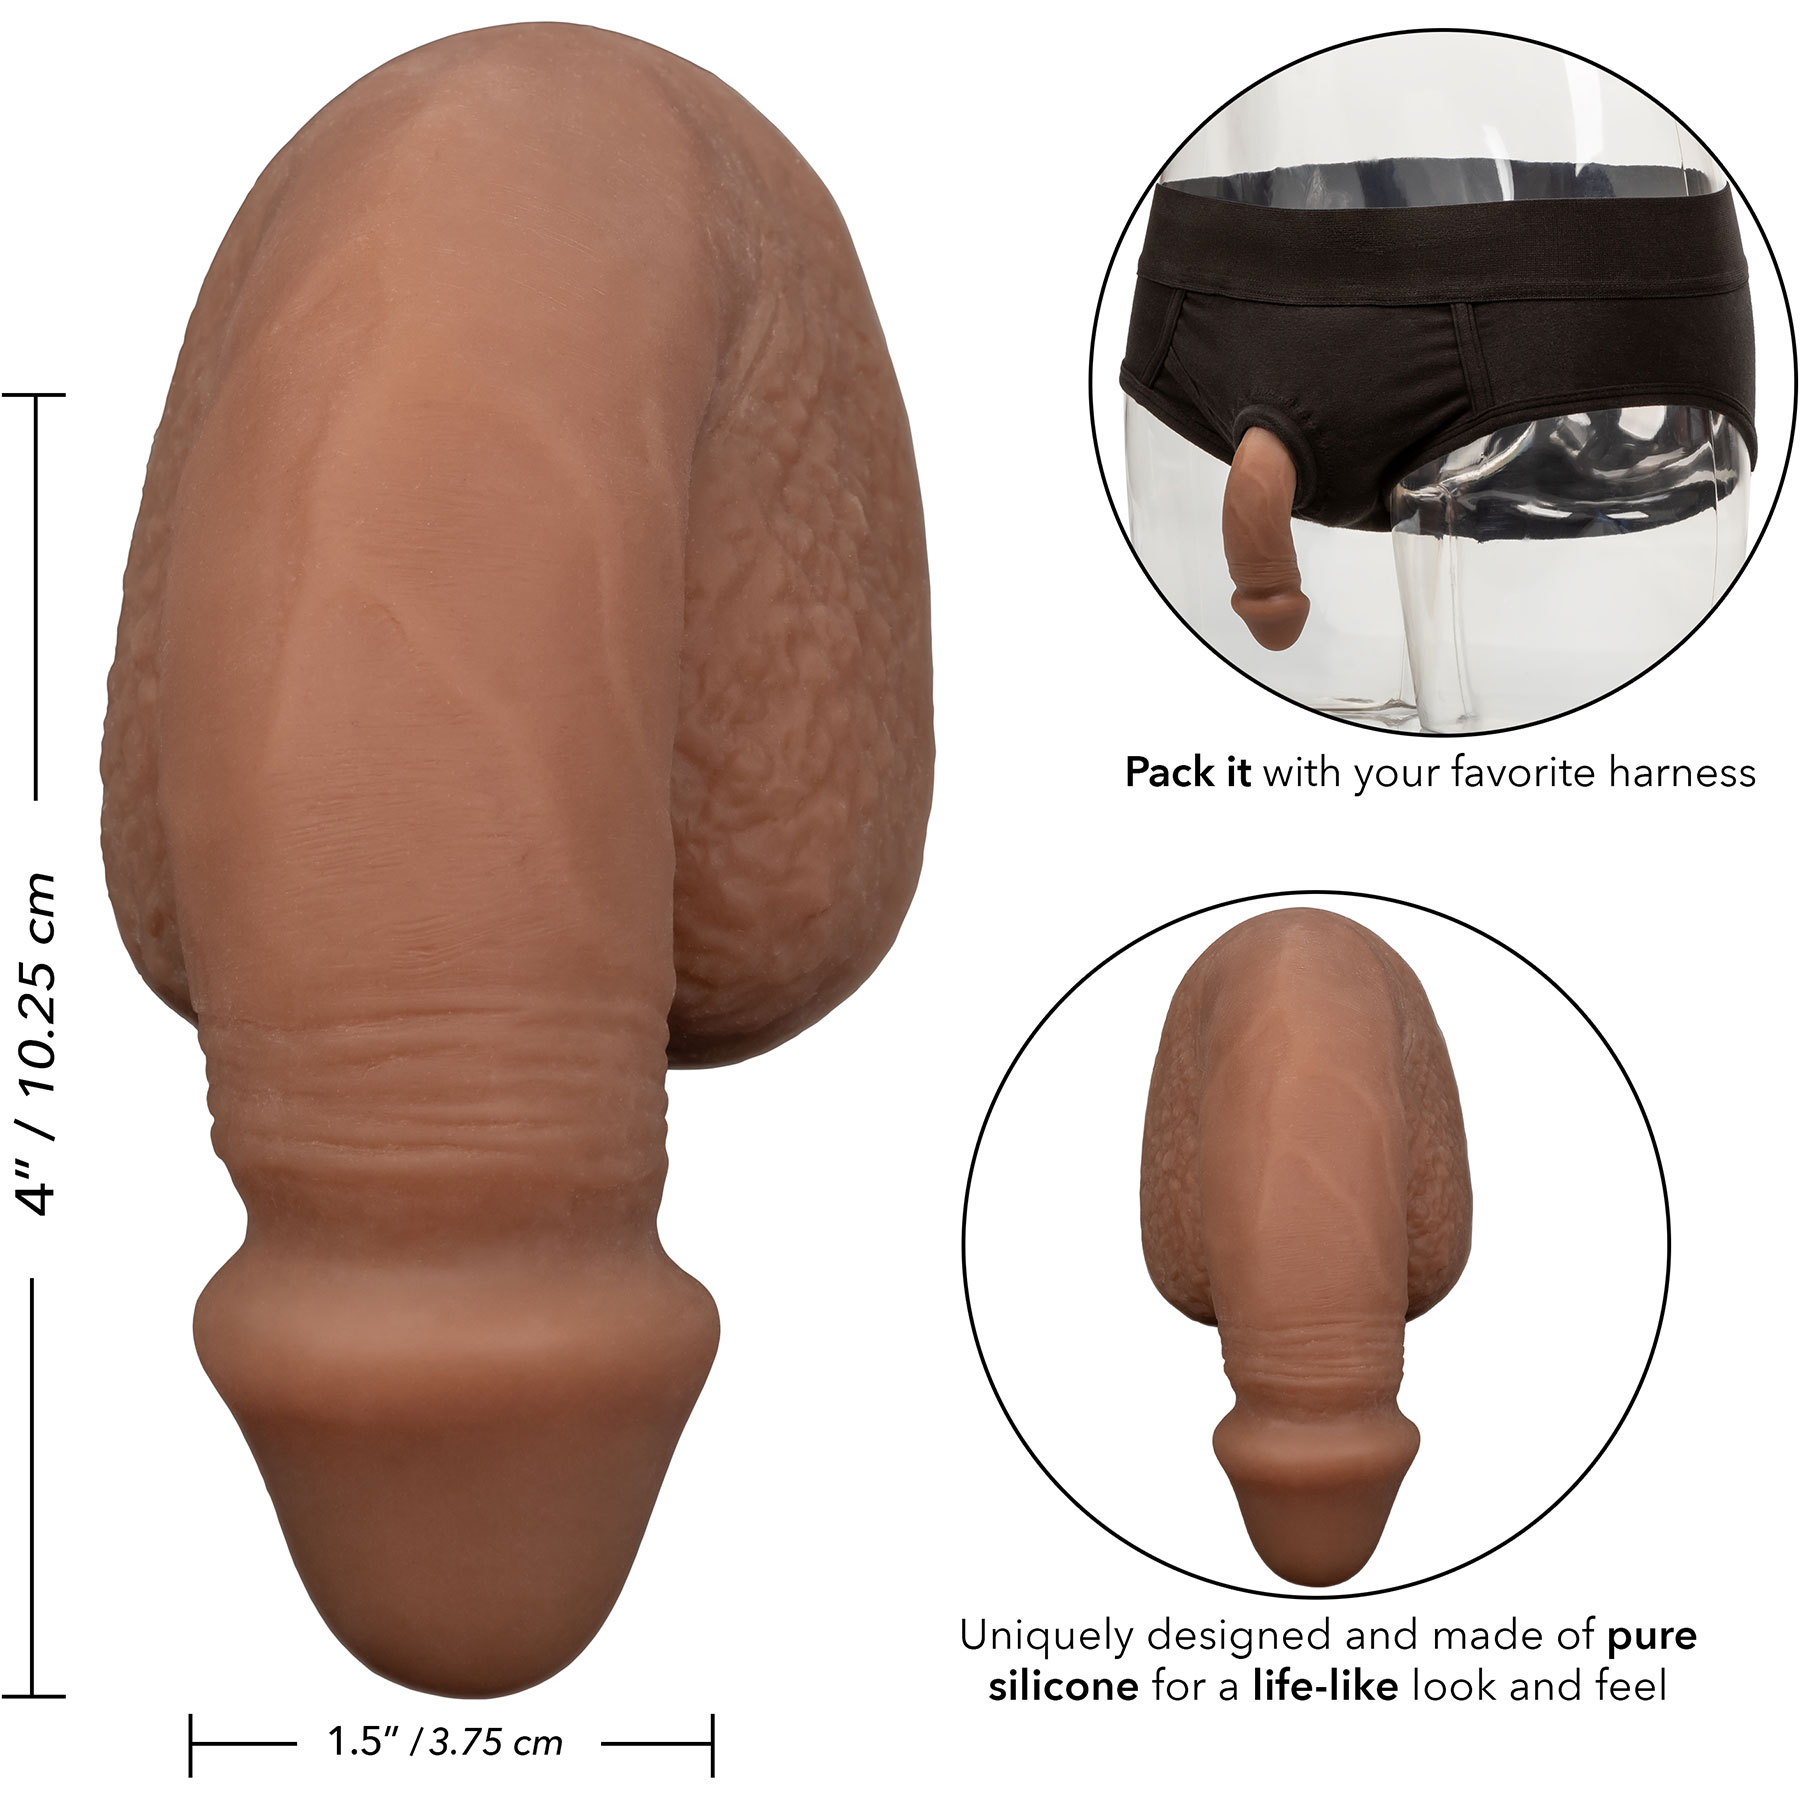 Packer Gear Silicone Packing Penis 4